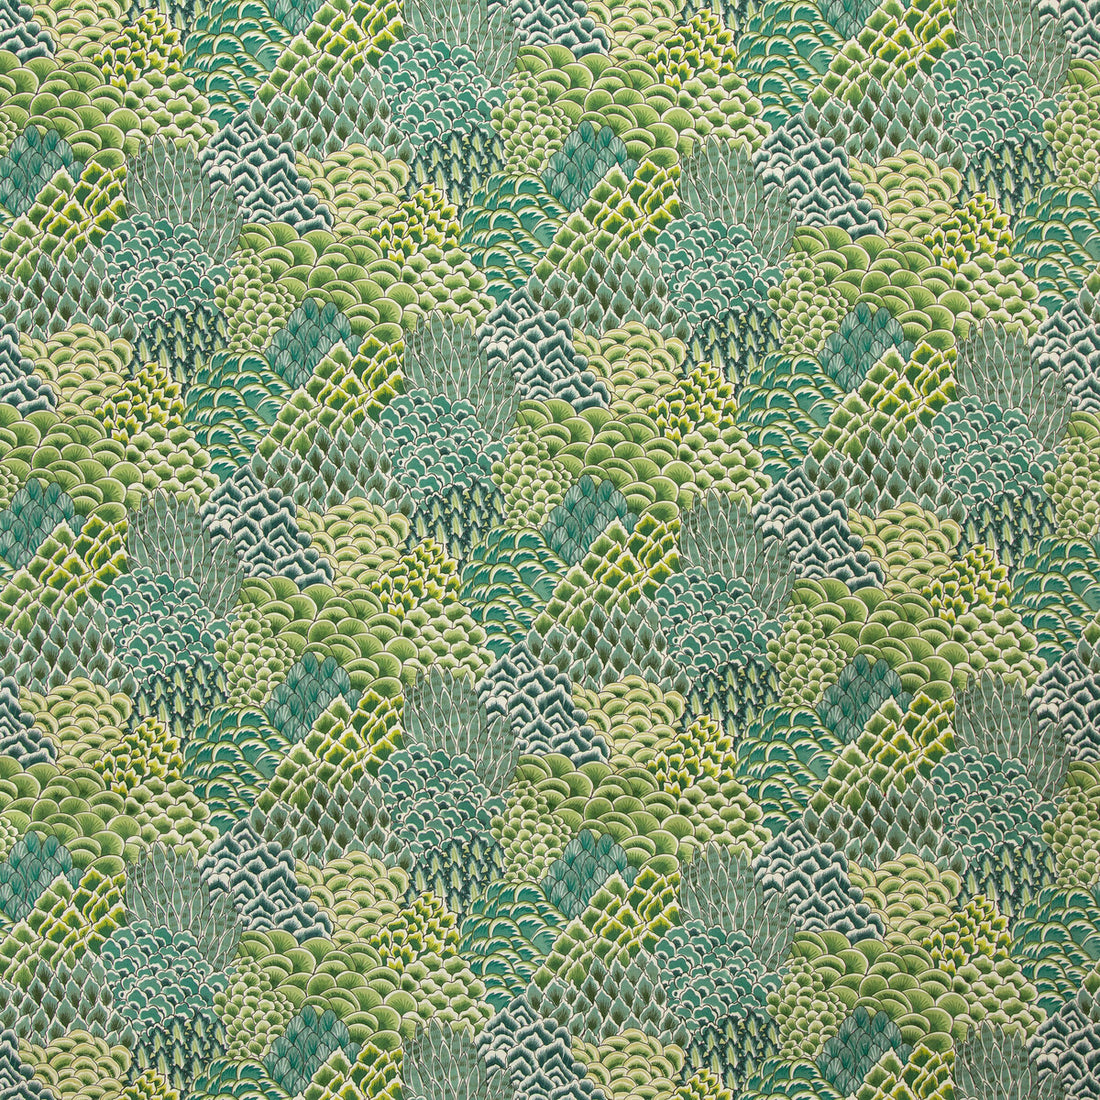 Katibi Print fabric in leaf color - pattern 8020104.33.0 - by Brunschwig &amp; Fils in the Grand Bazaar collection